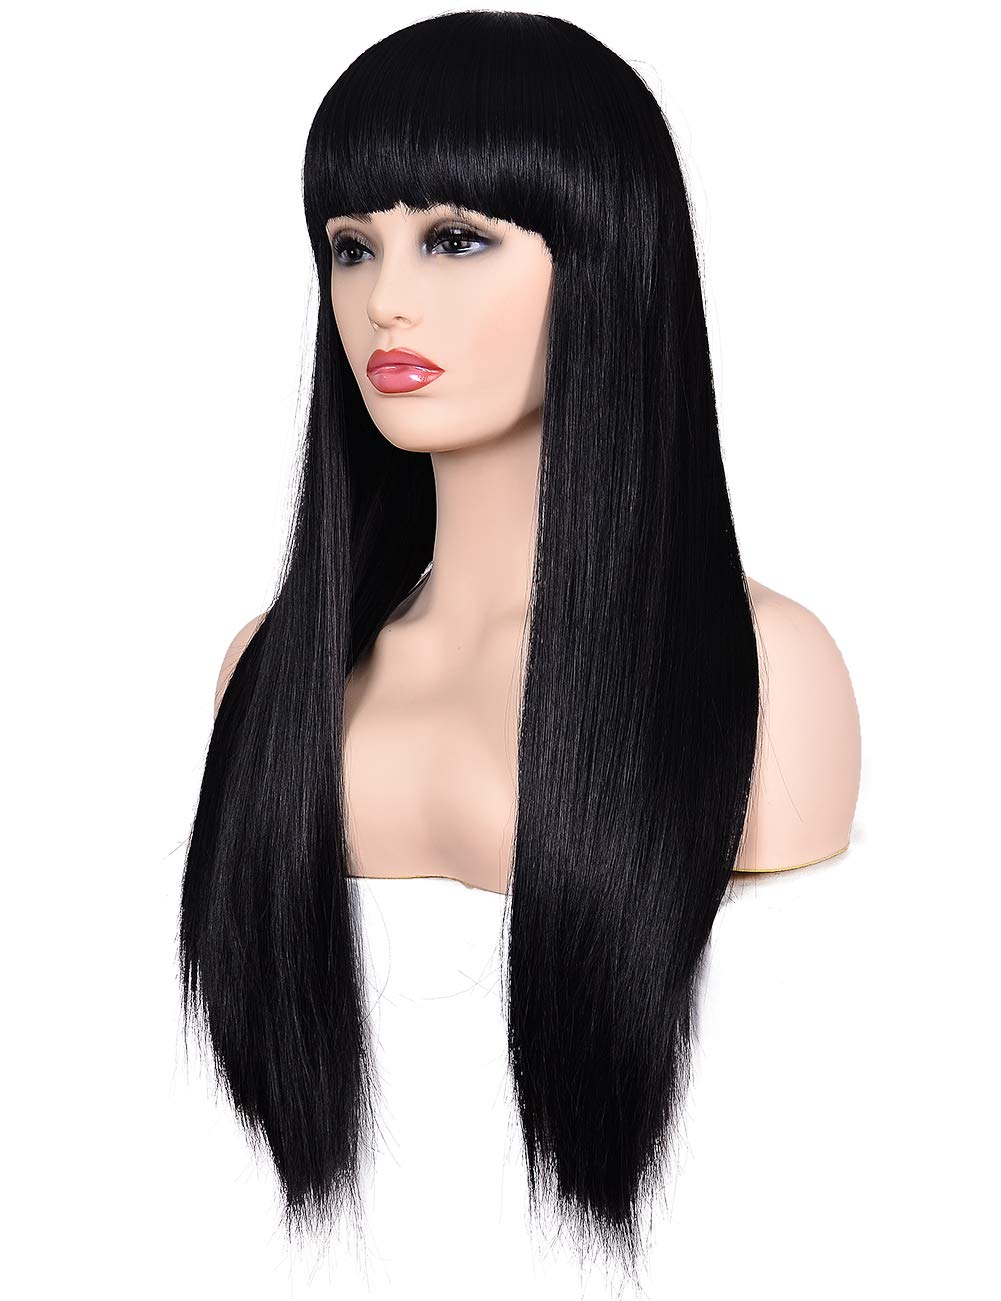 Lush Locks Synthetic Hair Natural Looking Long Black Straight Wigs for women and girls